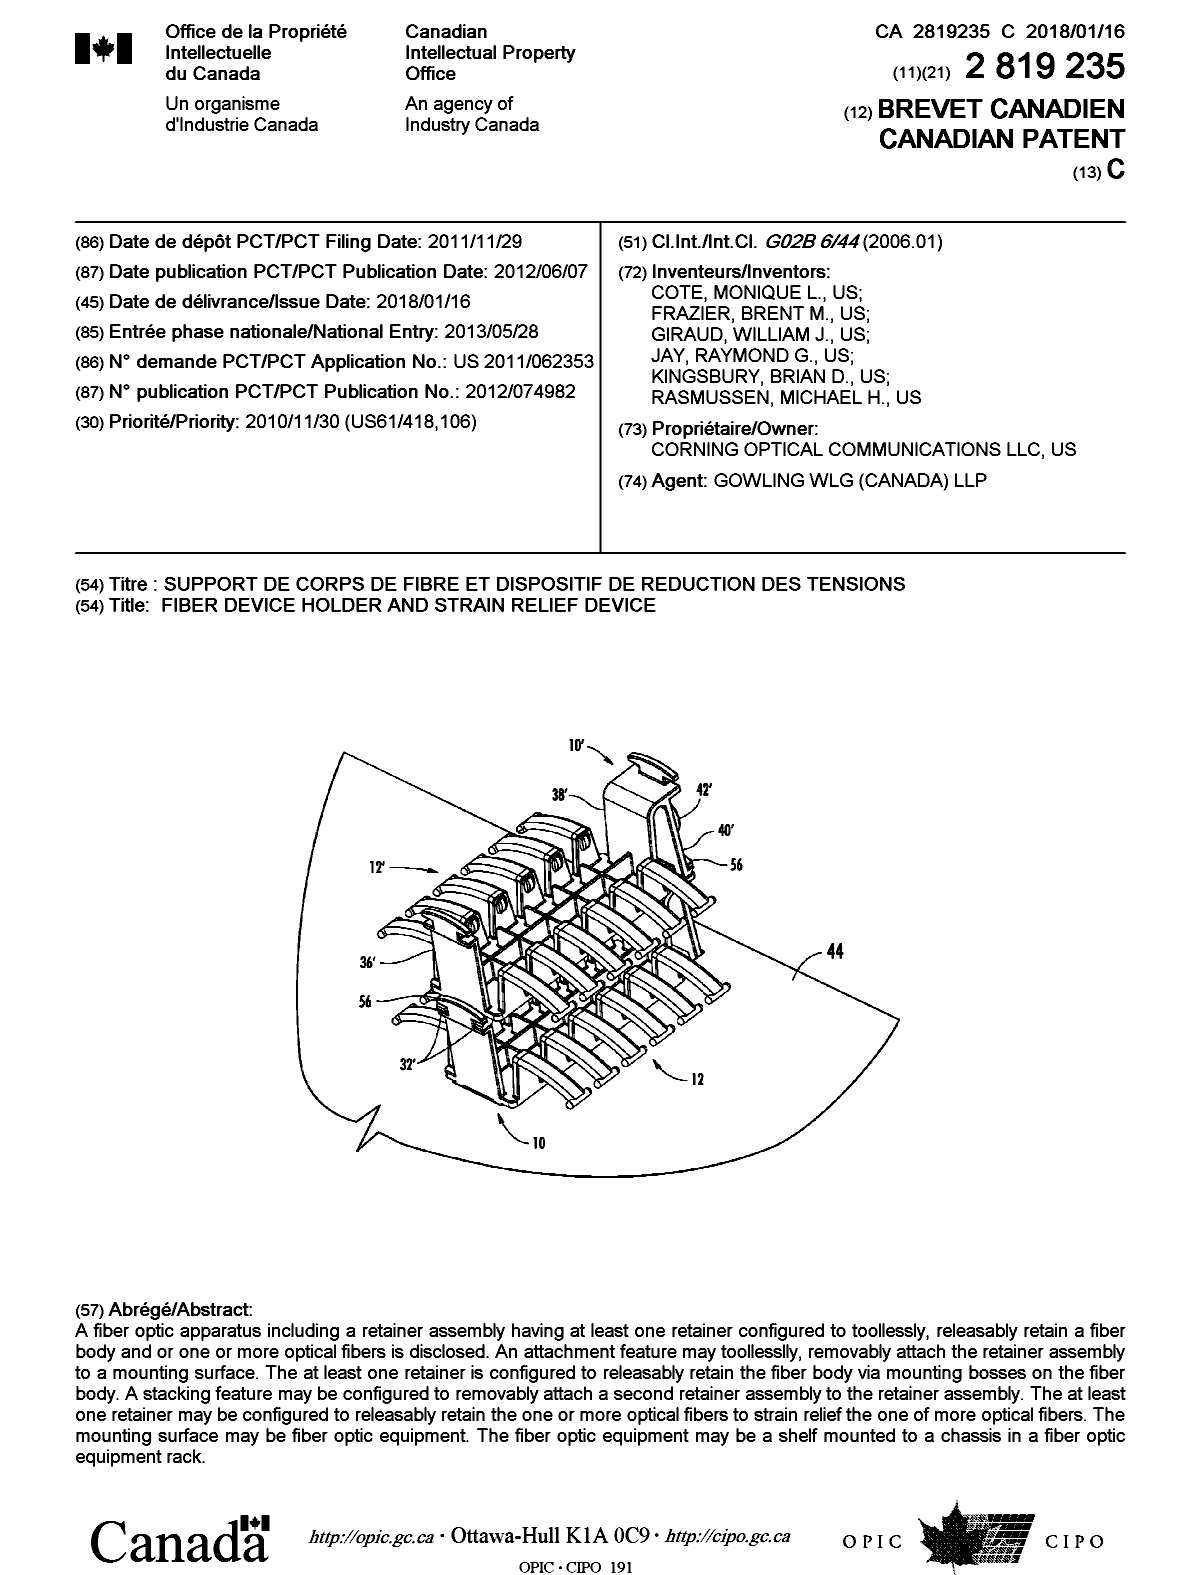 Canadian Patent Document 2819235. Cover Page 20180102. Image 1 of 1